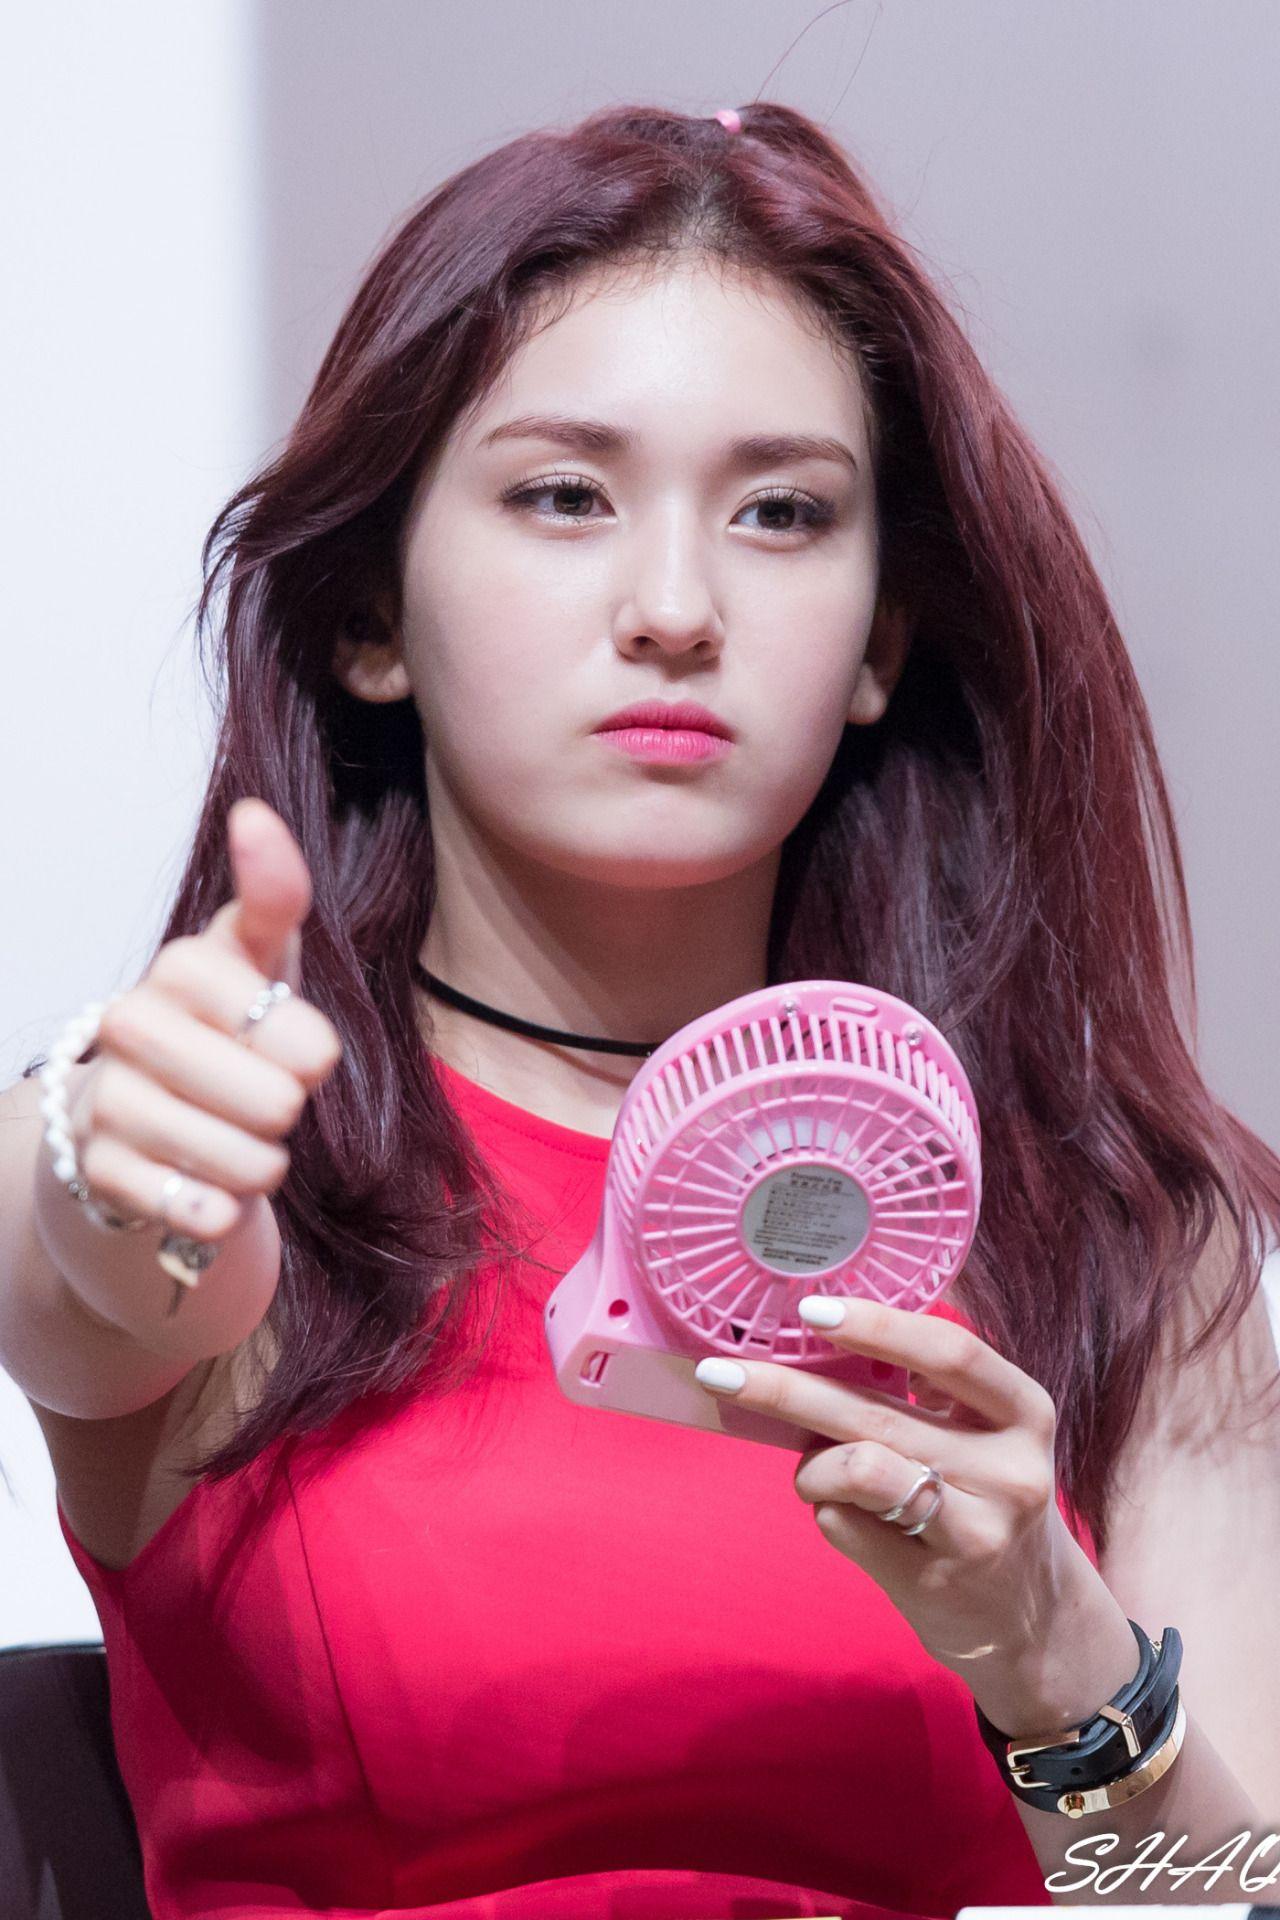 Jeon Somi Android IPhone Wallpaper KPOP Image Board